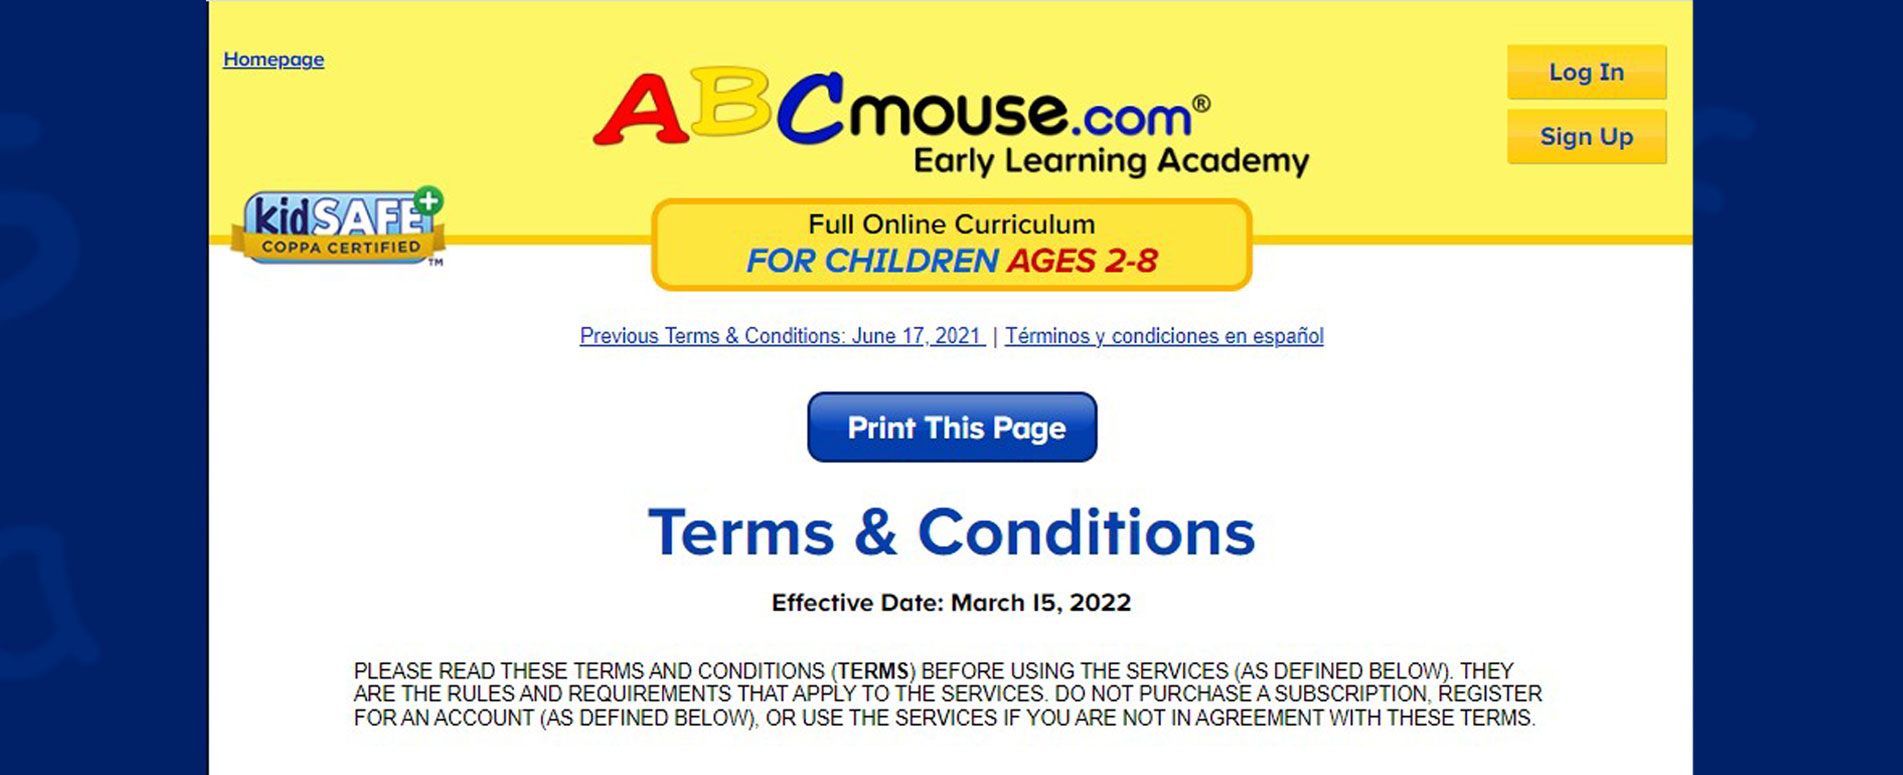 ABC Mouse Terms and Conditions Page Thumbnail